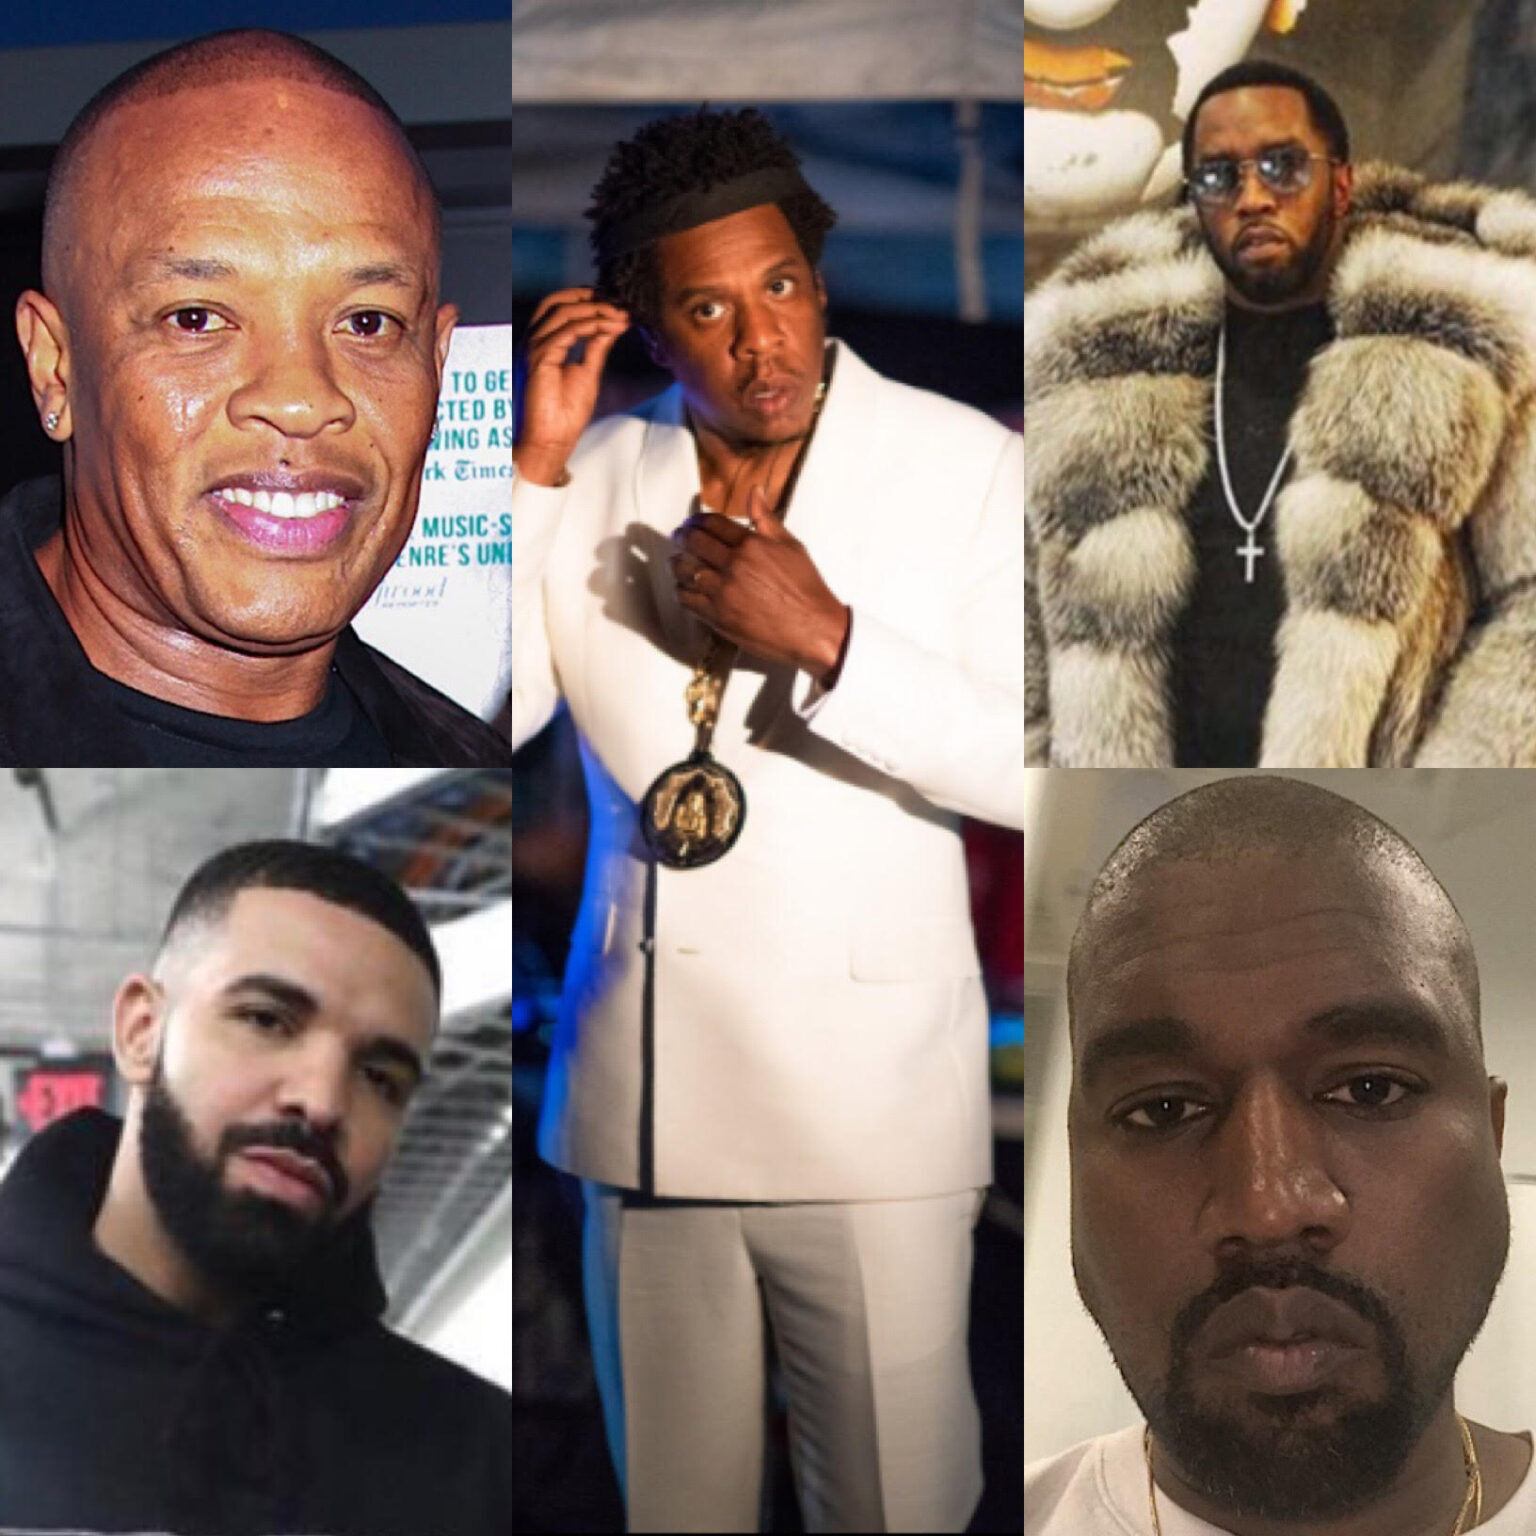 Who Is the Richest Rapper?